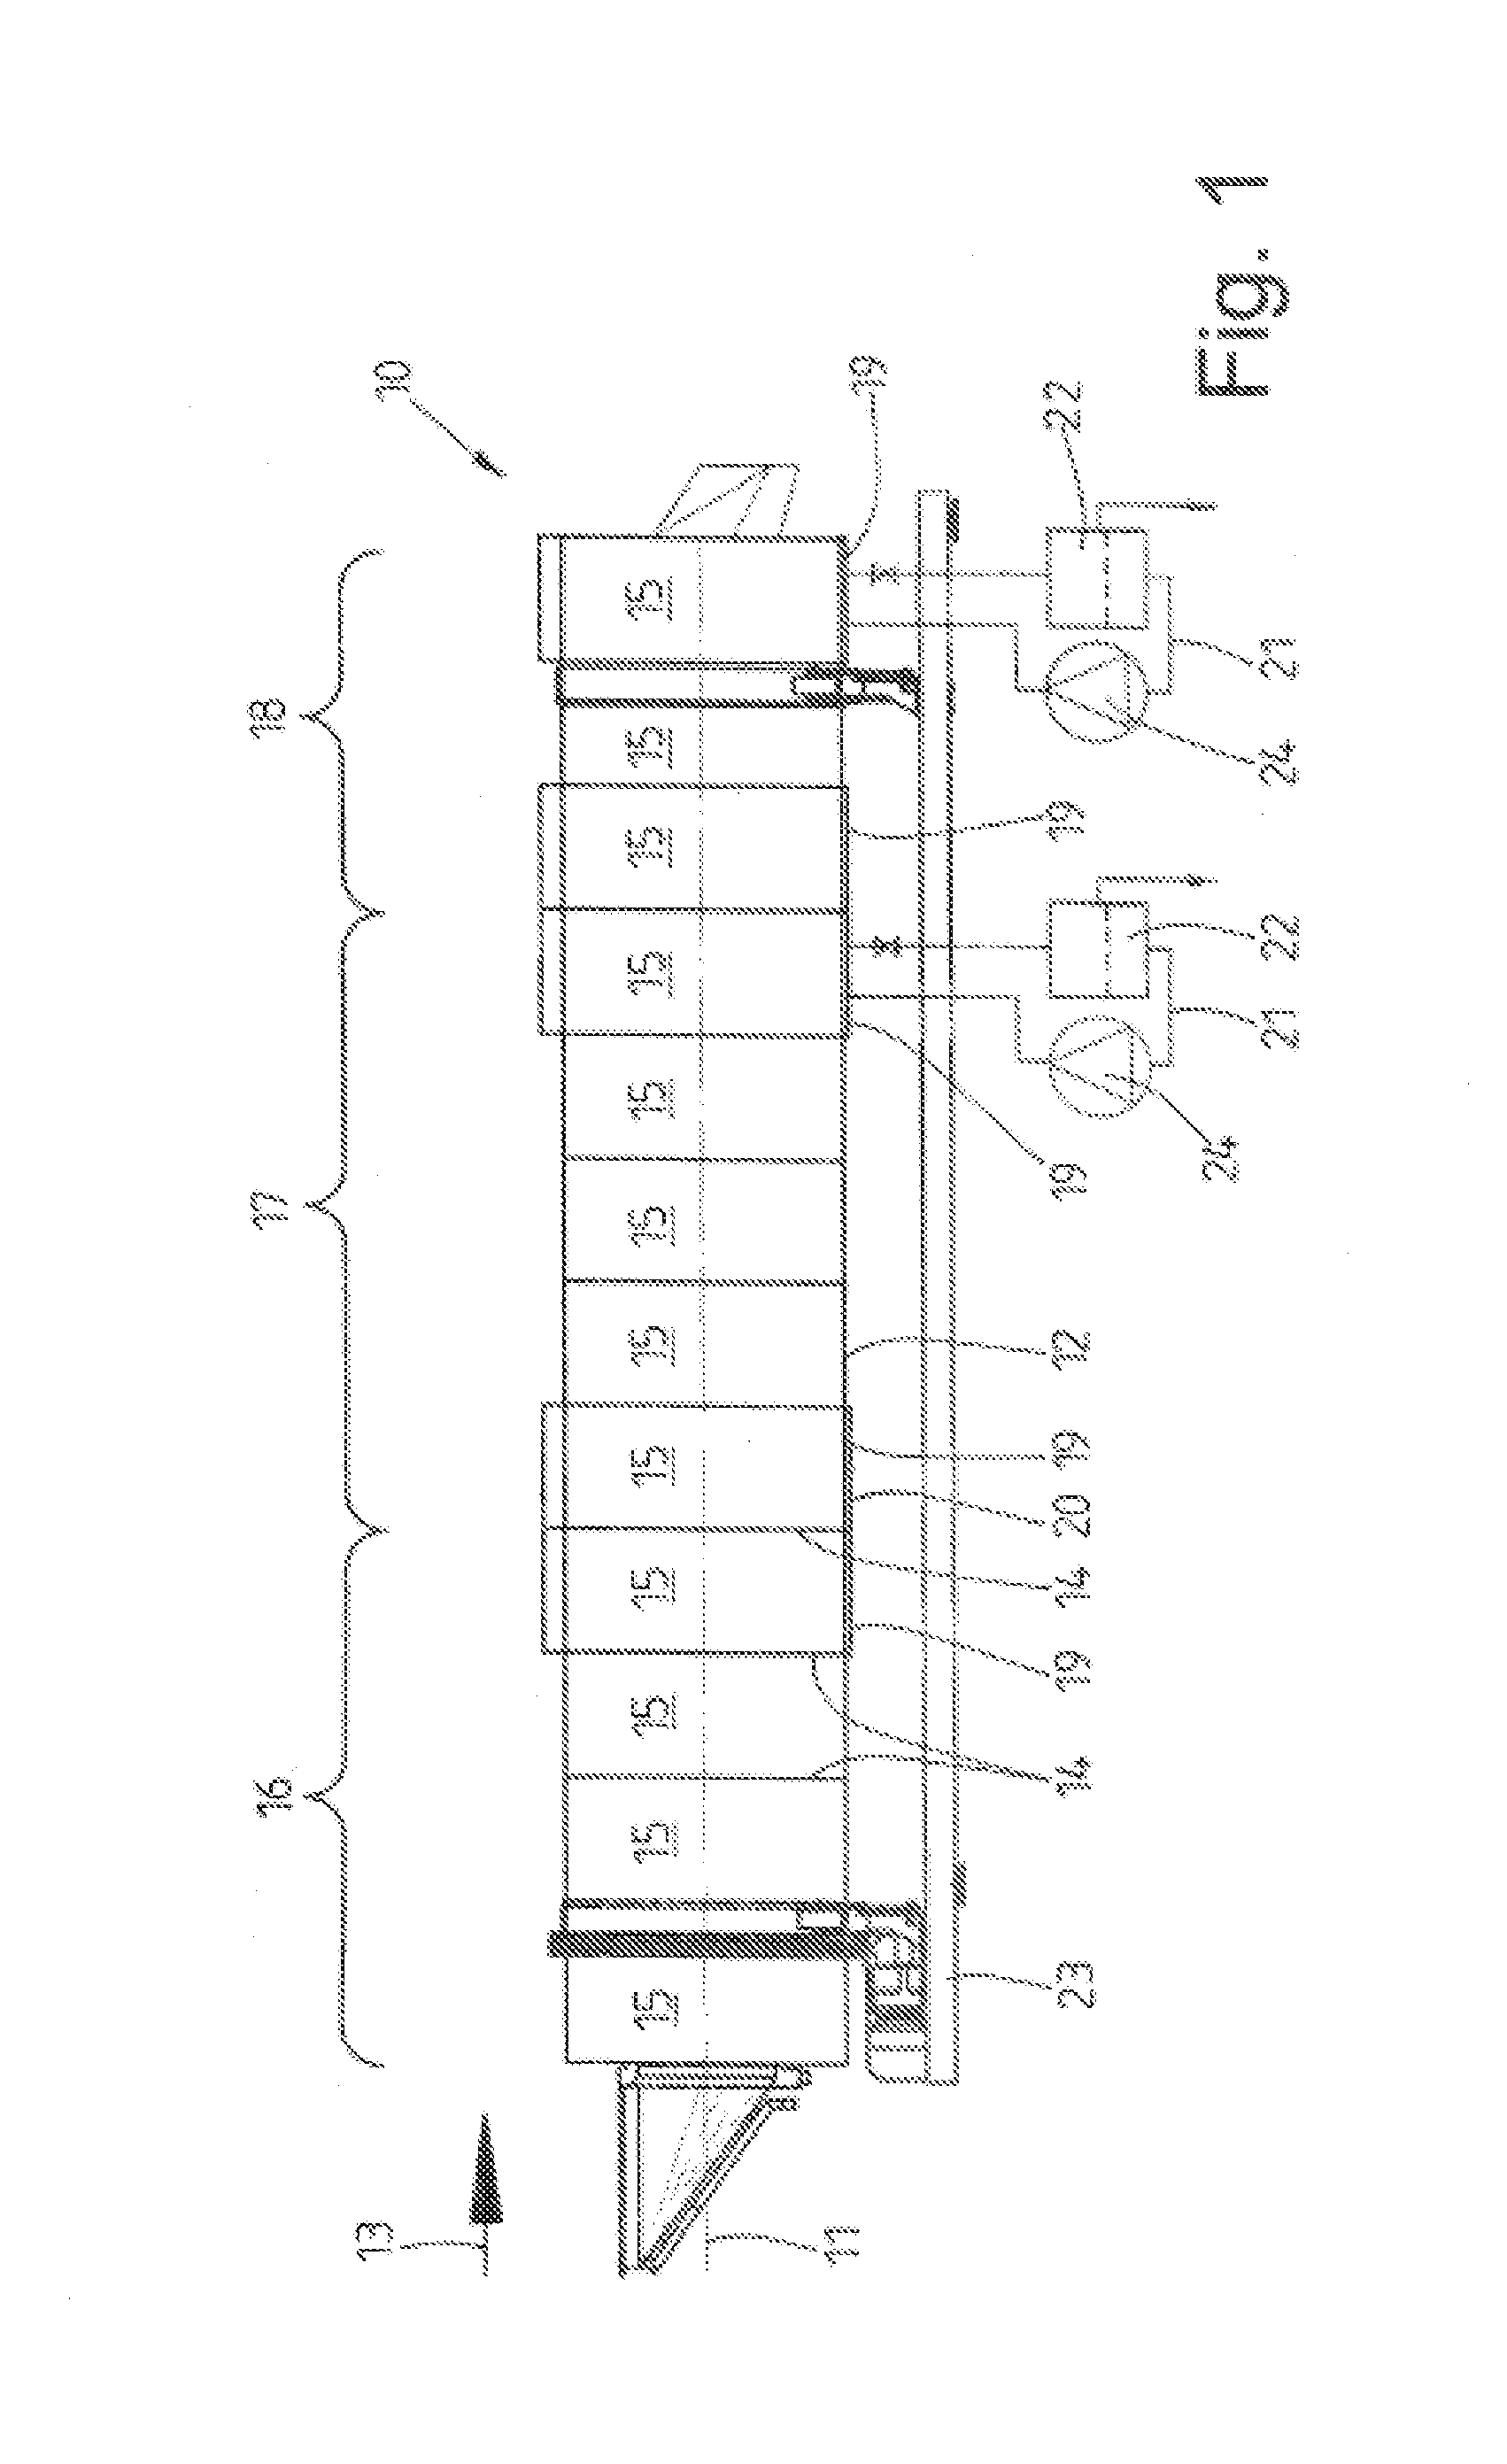 Method and apparatus for washing in particular items of laundry